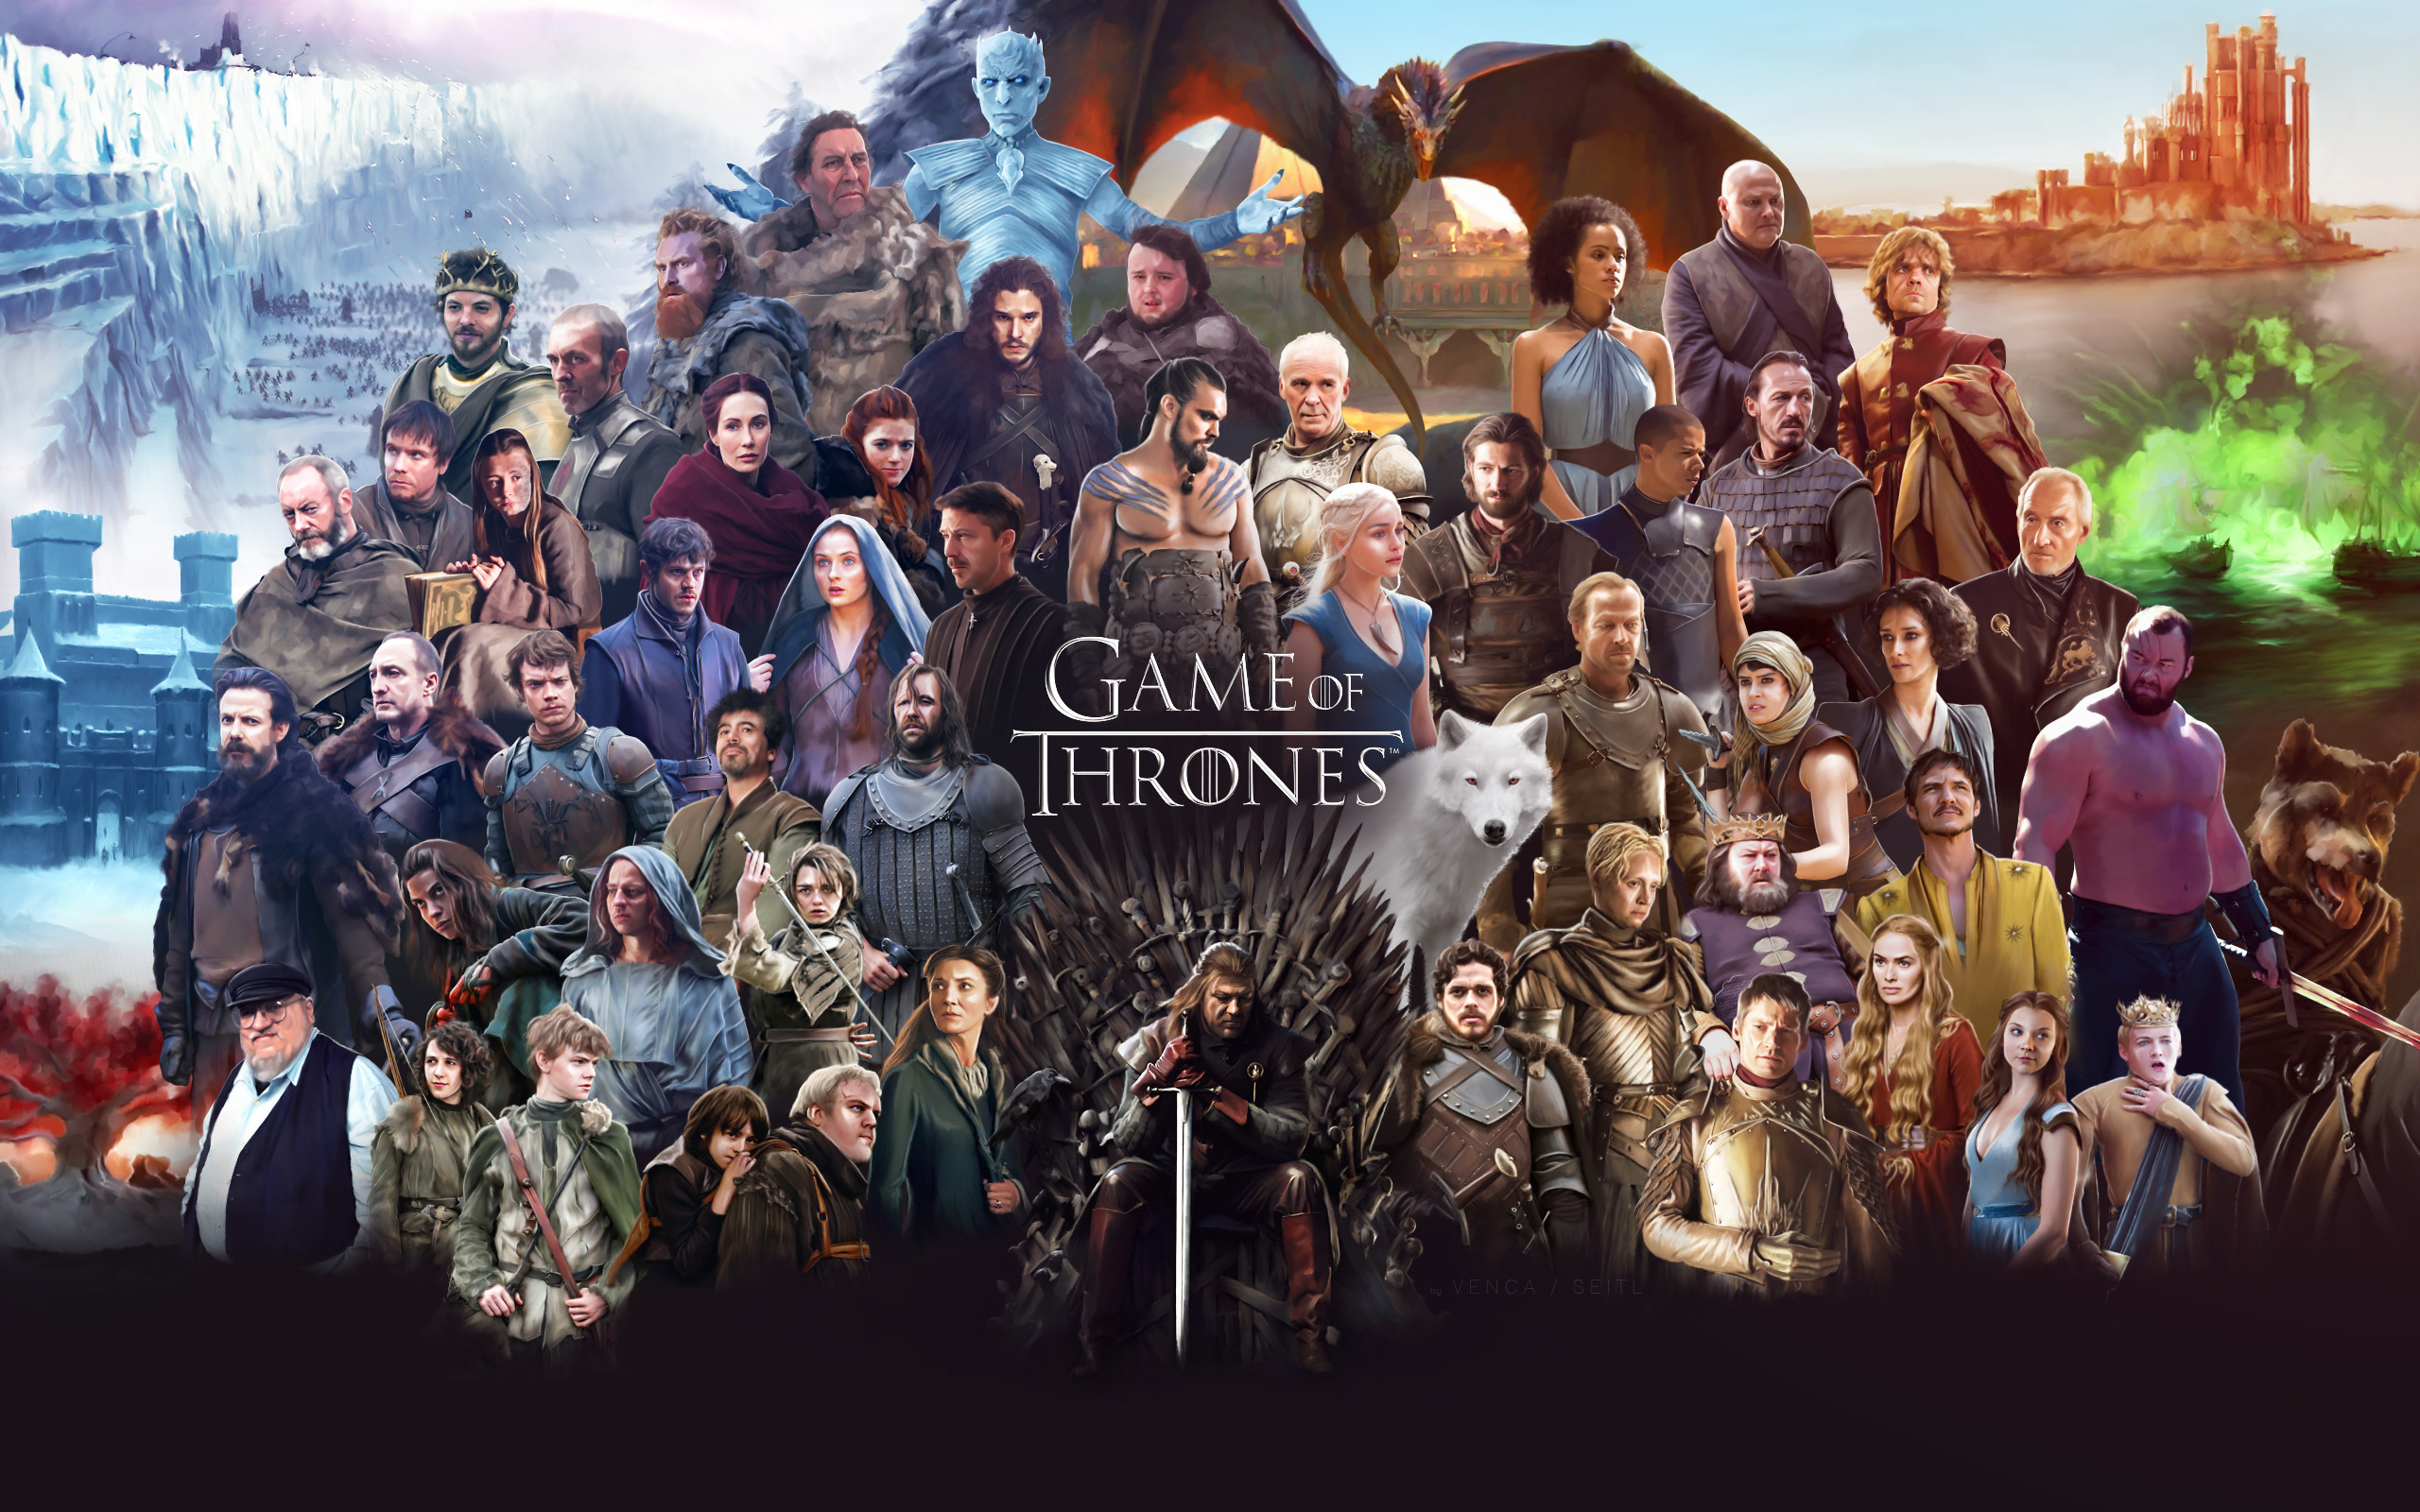 2560x1600 Game of Thrones images Game of Thrones HD wallpaper and background photos